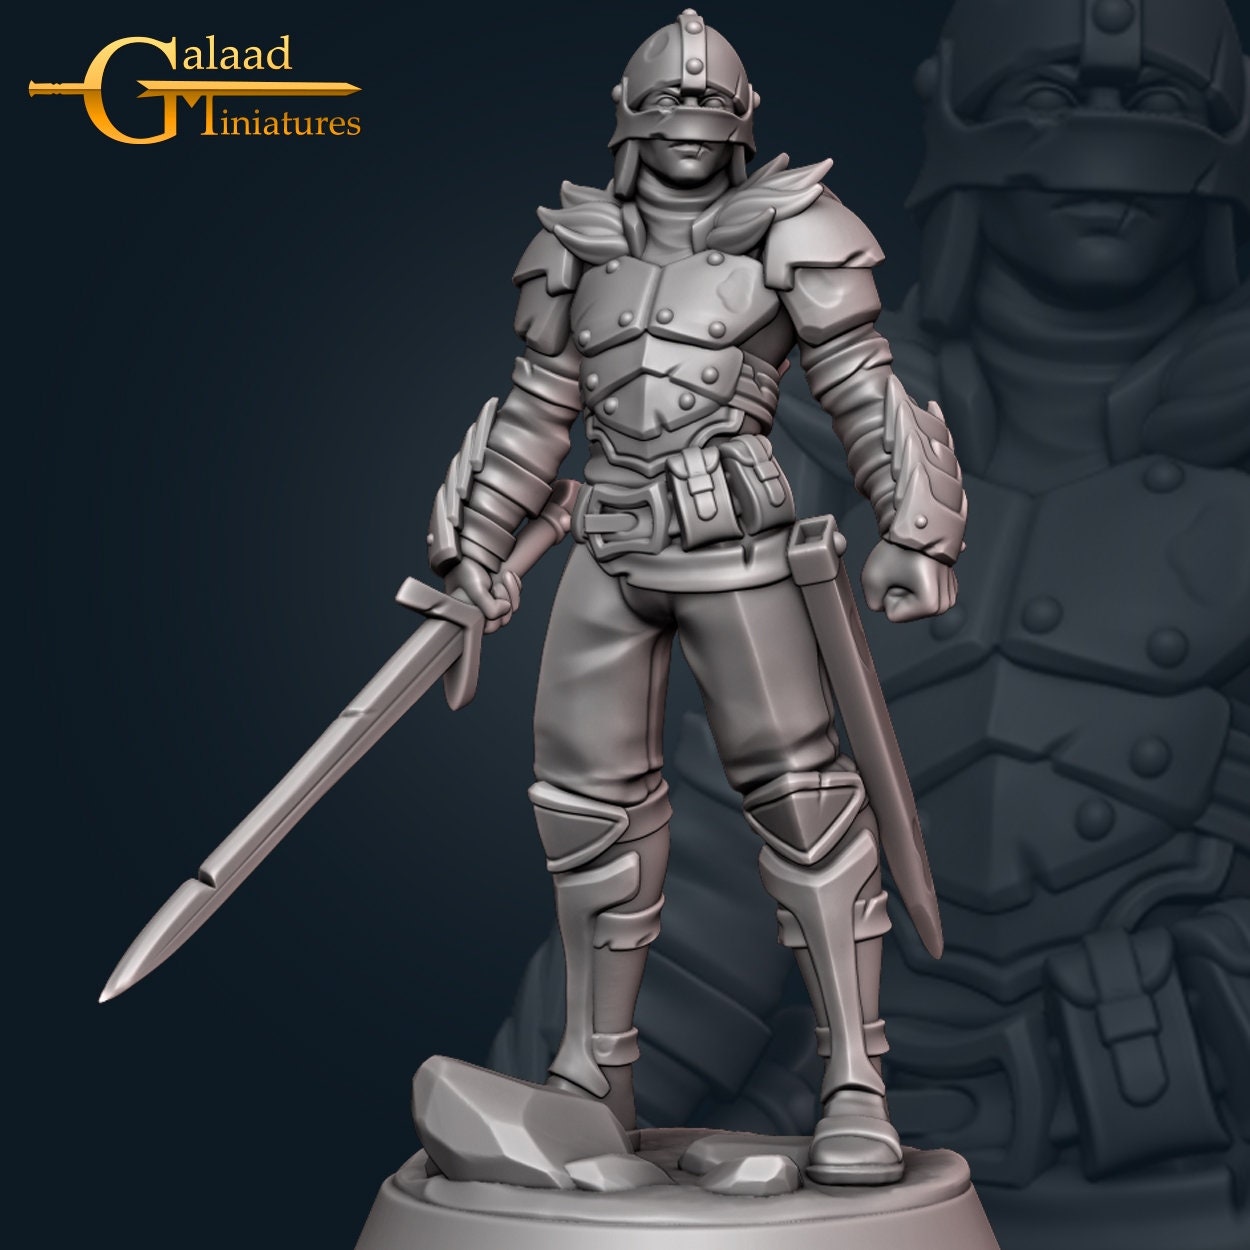 Male Human Fighter D&D miniature, by Galaad Miniatures // 3D Print on Demand / DnD / Pathfinder / RPG